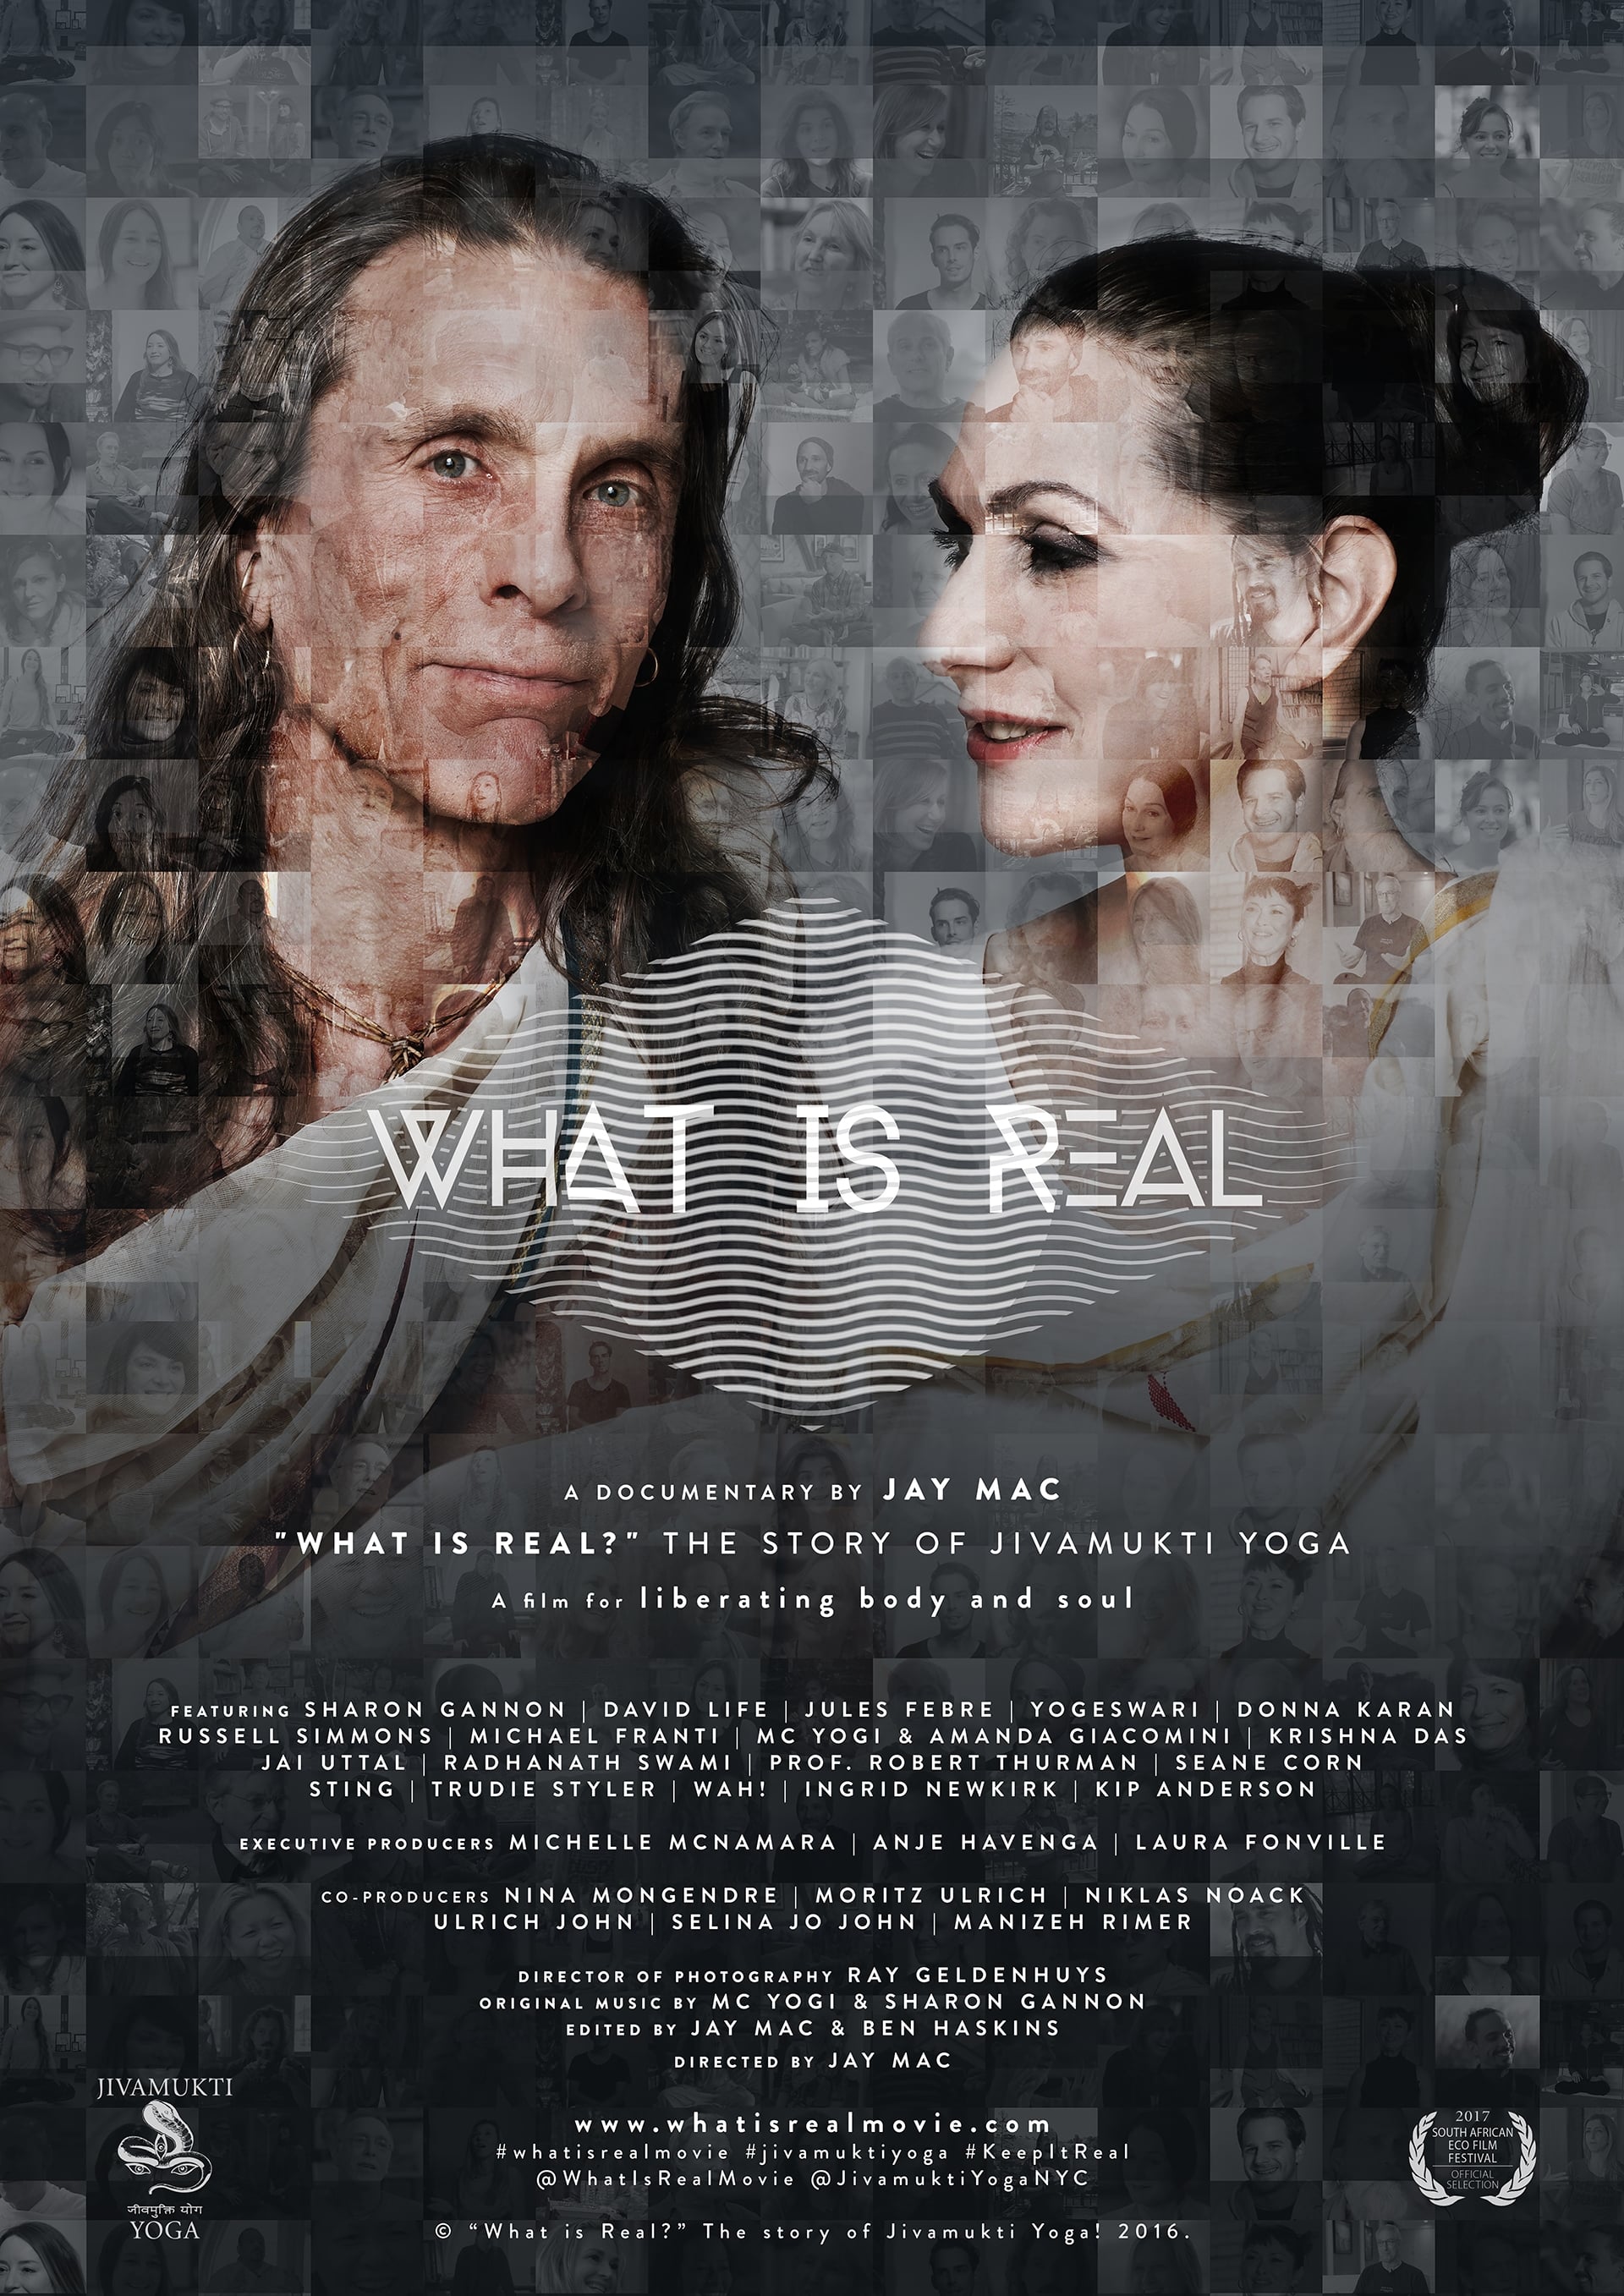 What is Real? The Story of Jivamukti Yoga